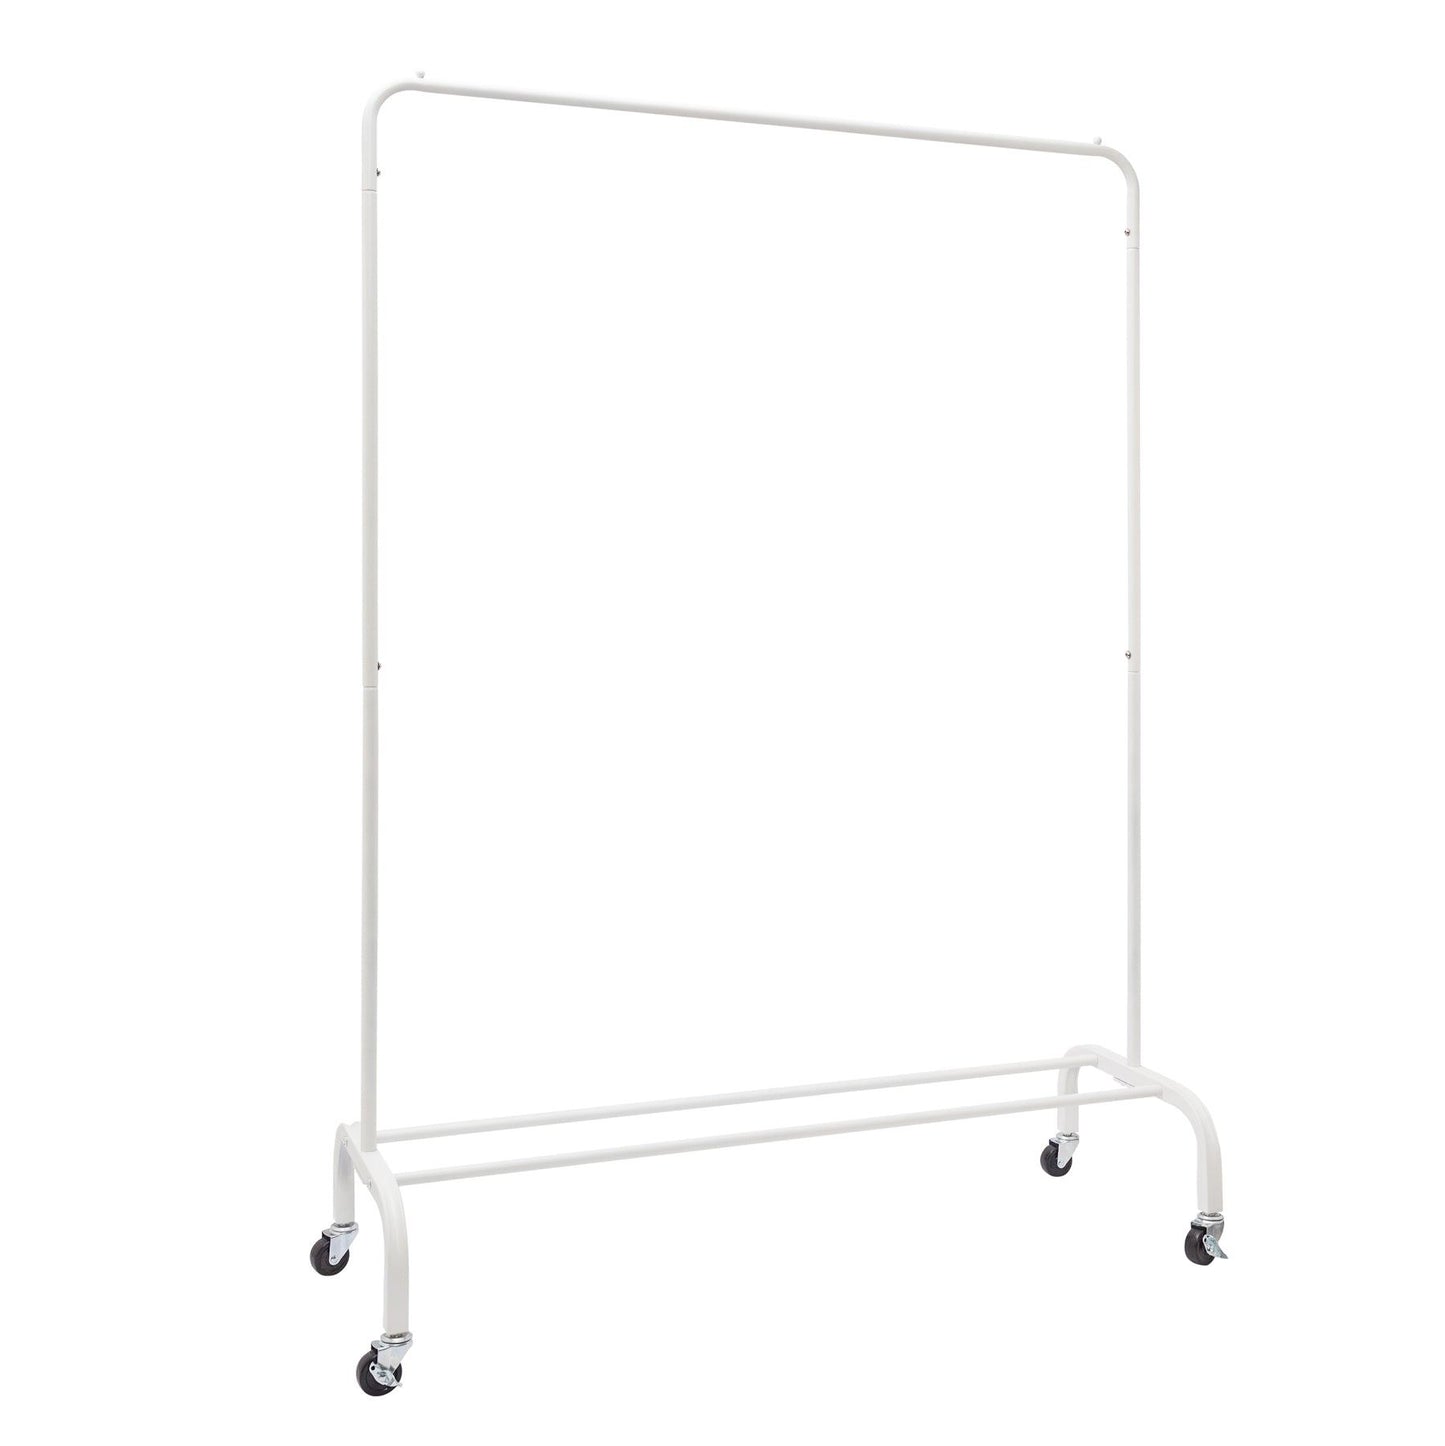 Clothes Rack with Extra Thick Rails - White - 60kgs Weight Capacity - Enhanced Metal Base Design & Durable Wheels Sold in 1/3/5 - Hangersforless